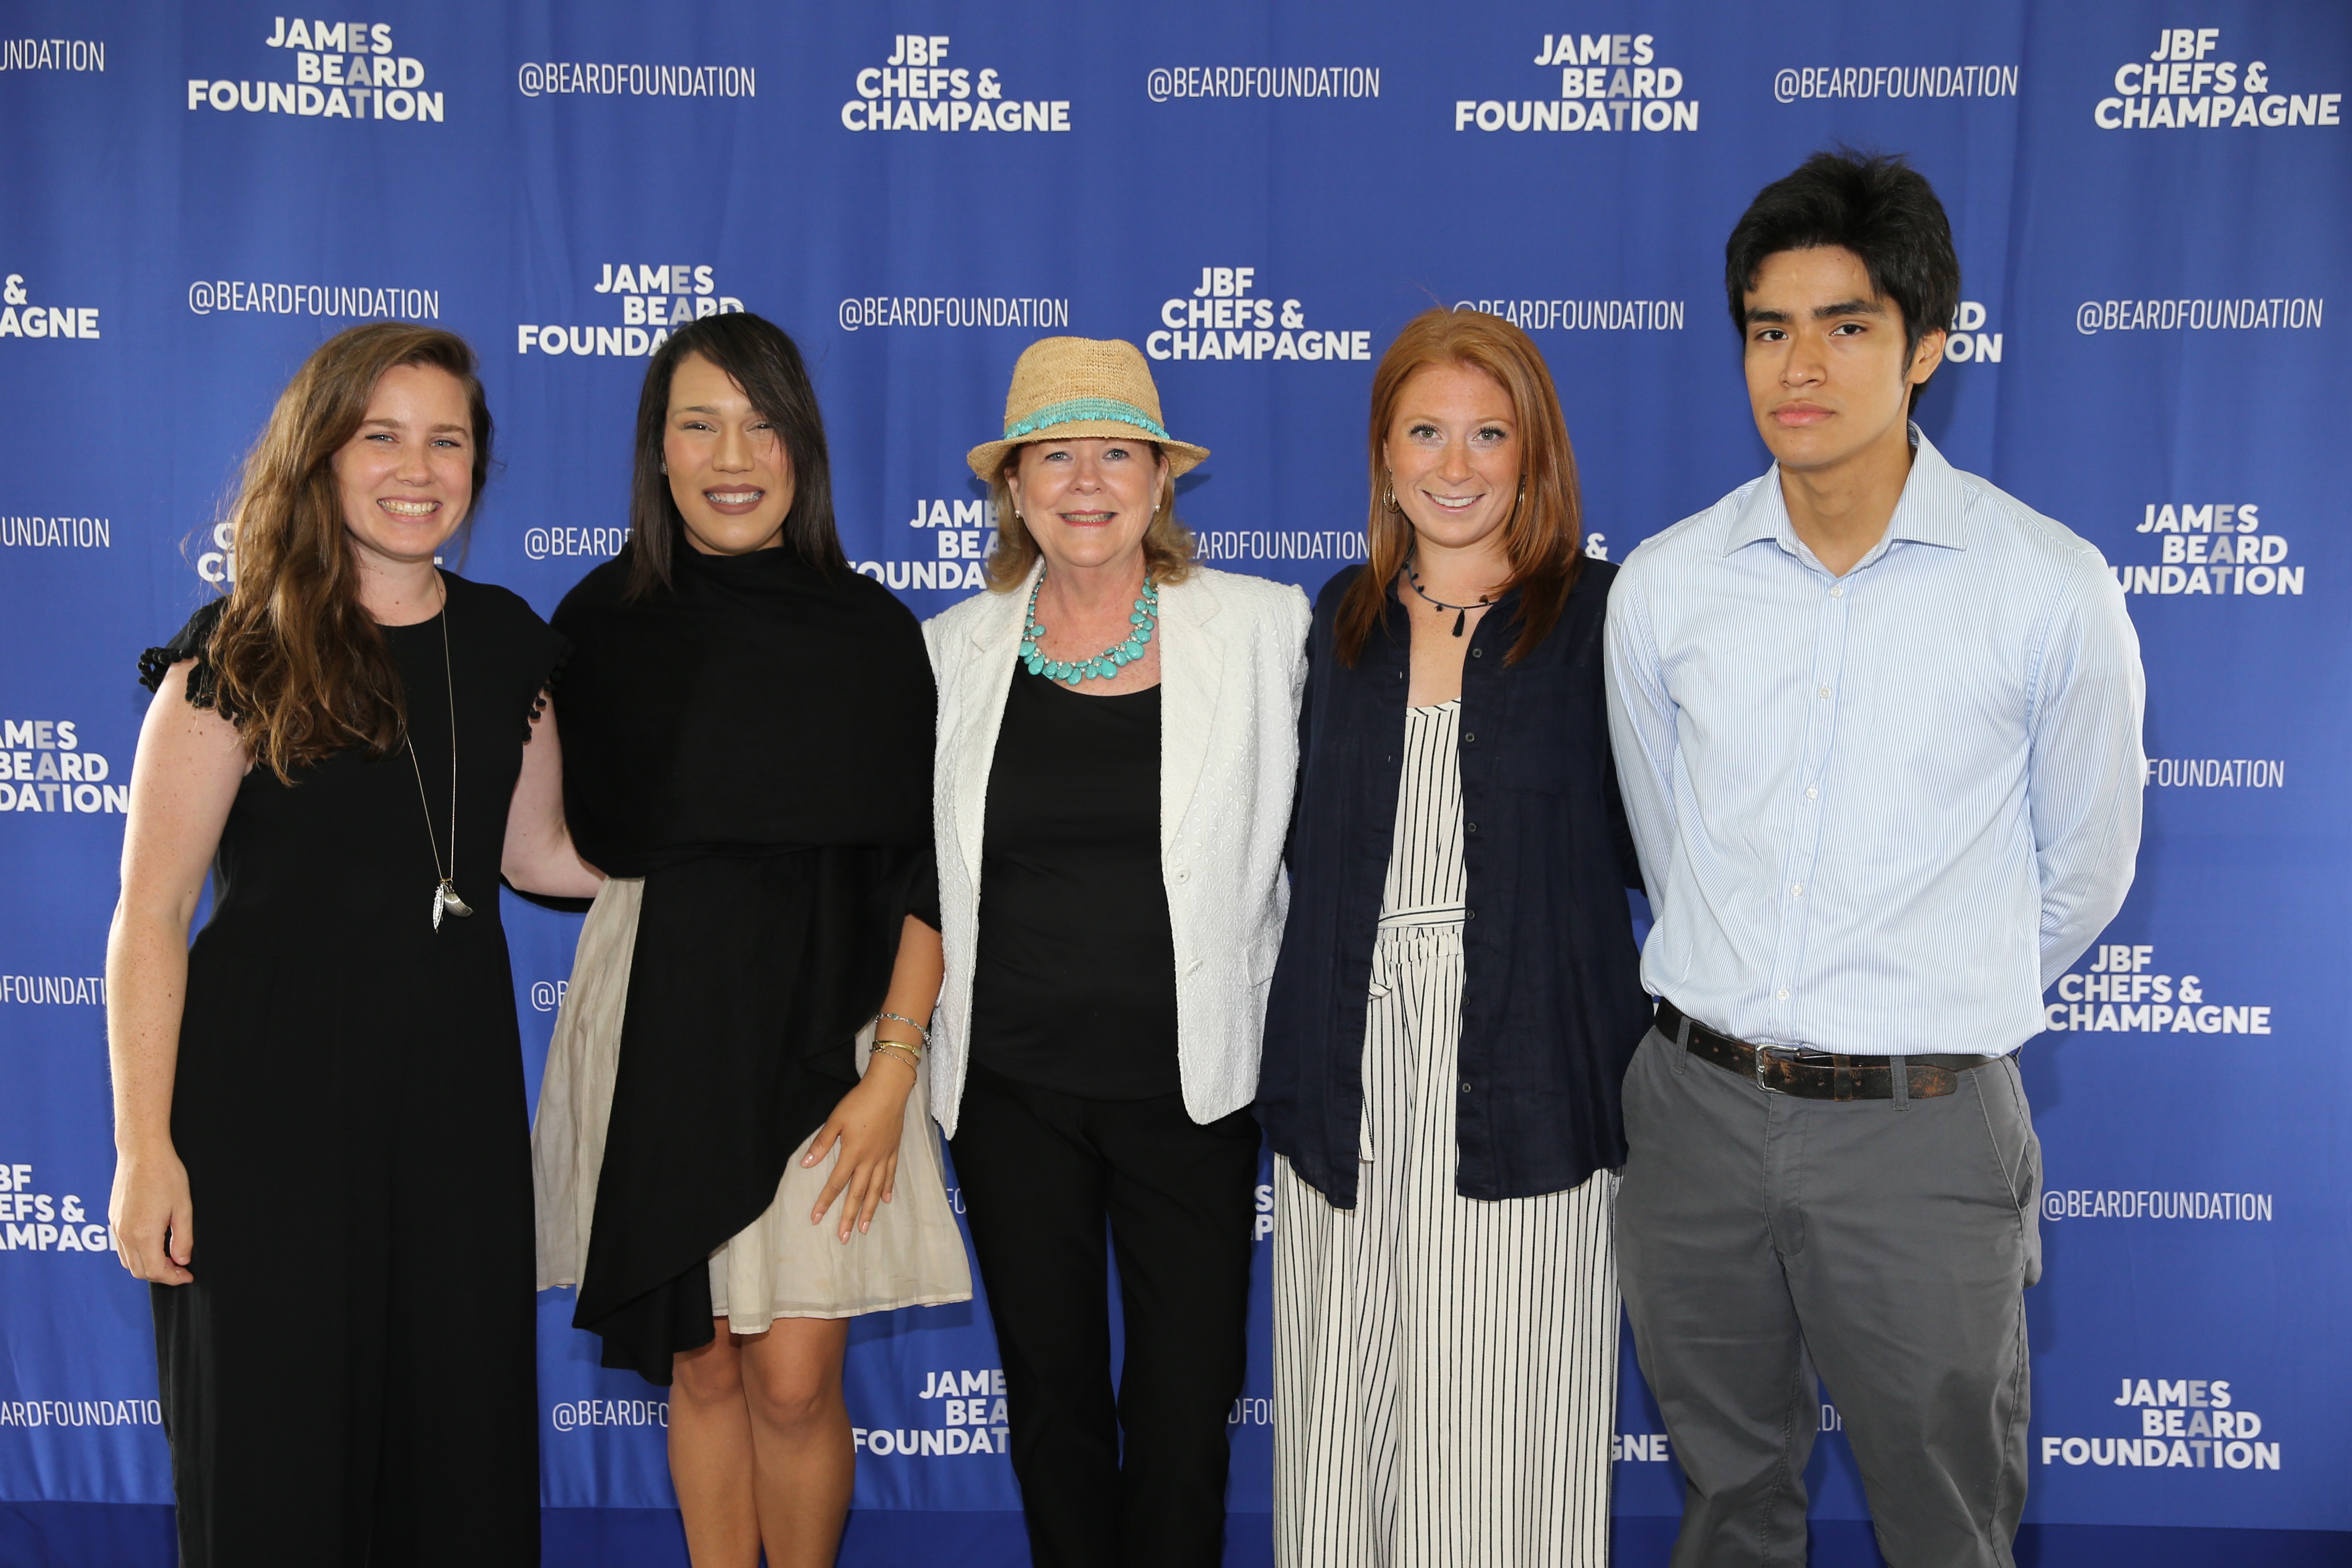 Scholarship recipient Jordan Werner, Earlene Cruz, JBF President Susan Ungaro, Scholarship recipient, Christina Cassel, Scholarship recipient Luis Reyes seen at the 2017 JBF Chefs and Champagne at Wolffer estate on Saturday, July 29, 2017 in Sagaponack, N.Y. (Photo by Mark Von Holden/Invision for James Beard Foundation/Invision)